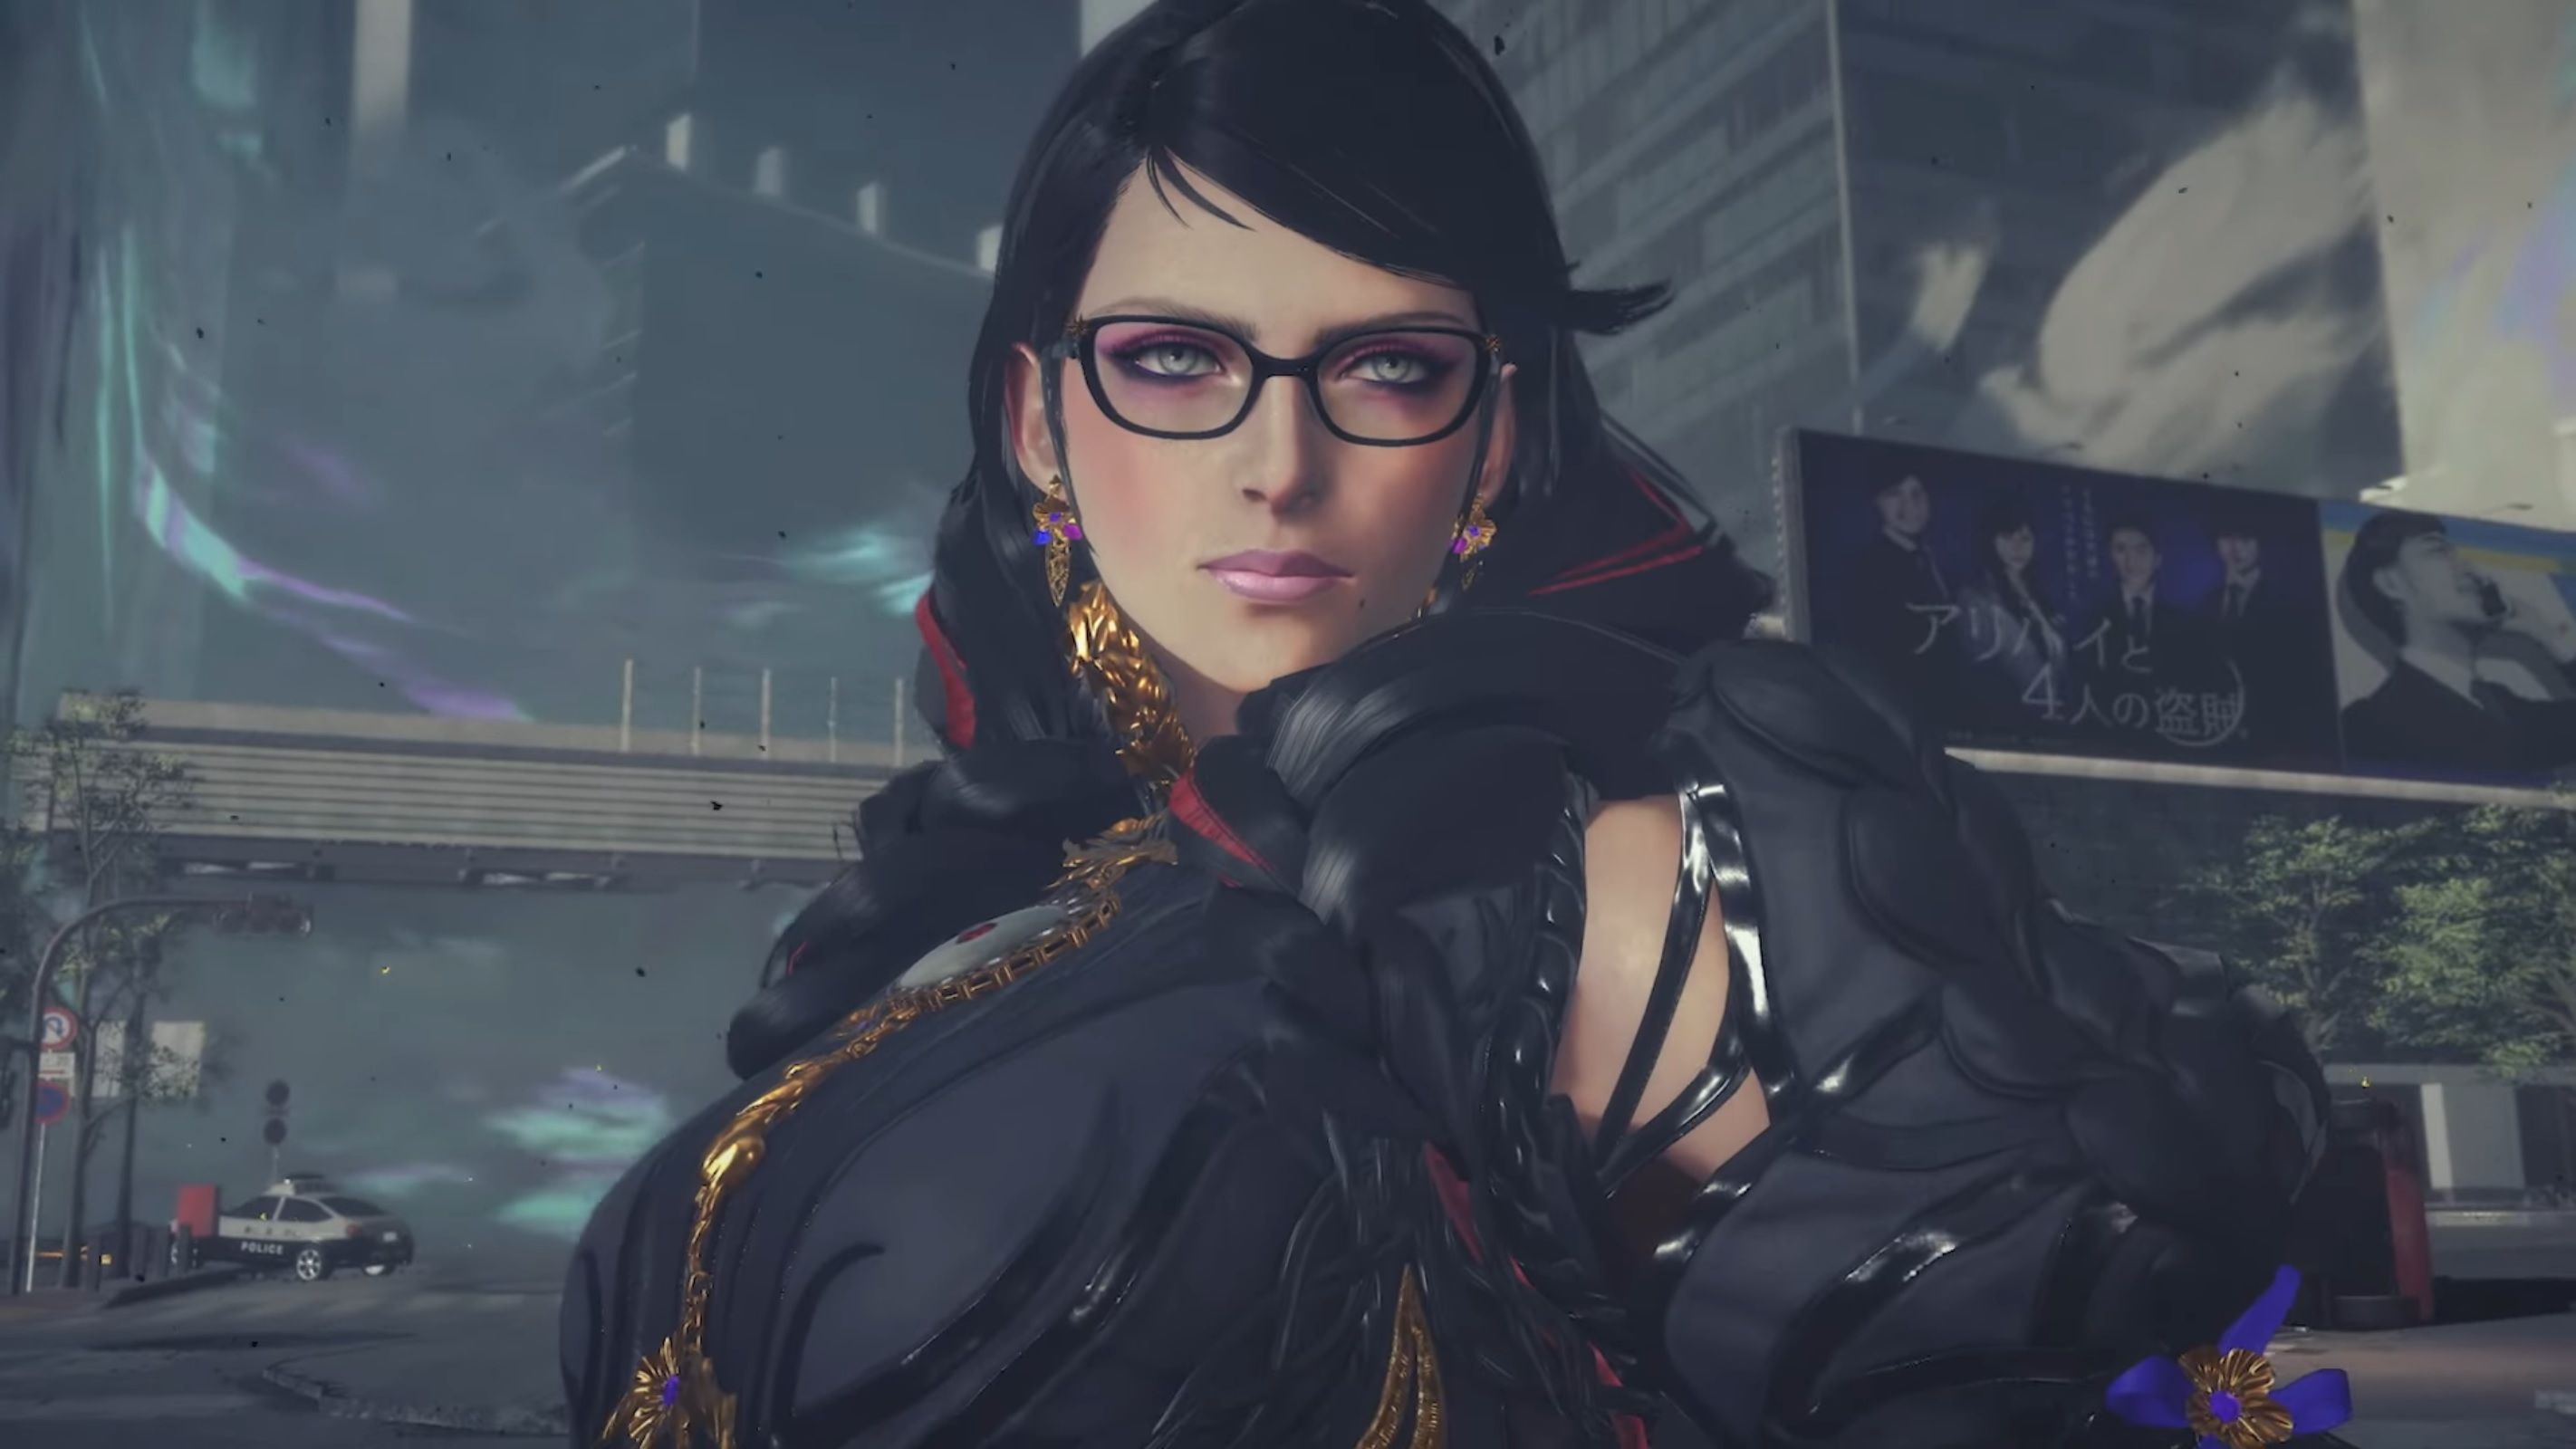 Bayonetta's Original Voice Actor Disputes Claims, Says She Only Asked For  'A Fair, Living Wage